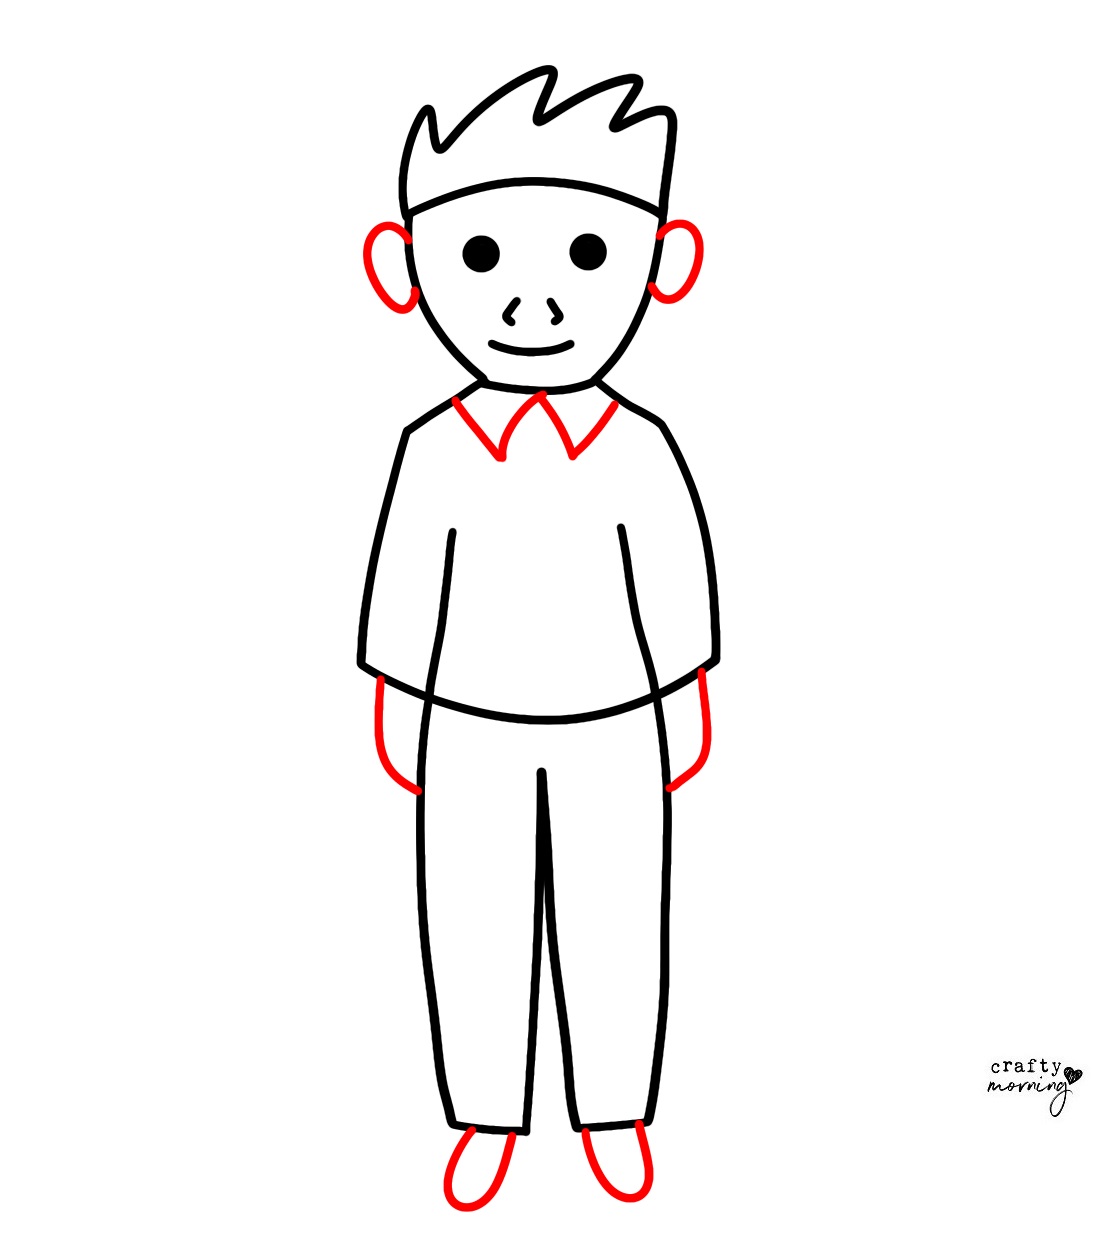 Easy How to Draw a Man Tutorial and Man Coloring Page